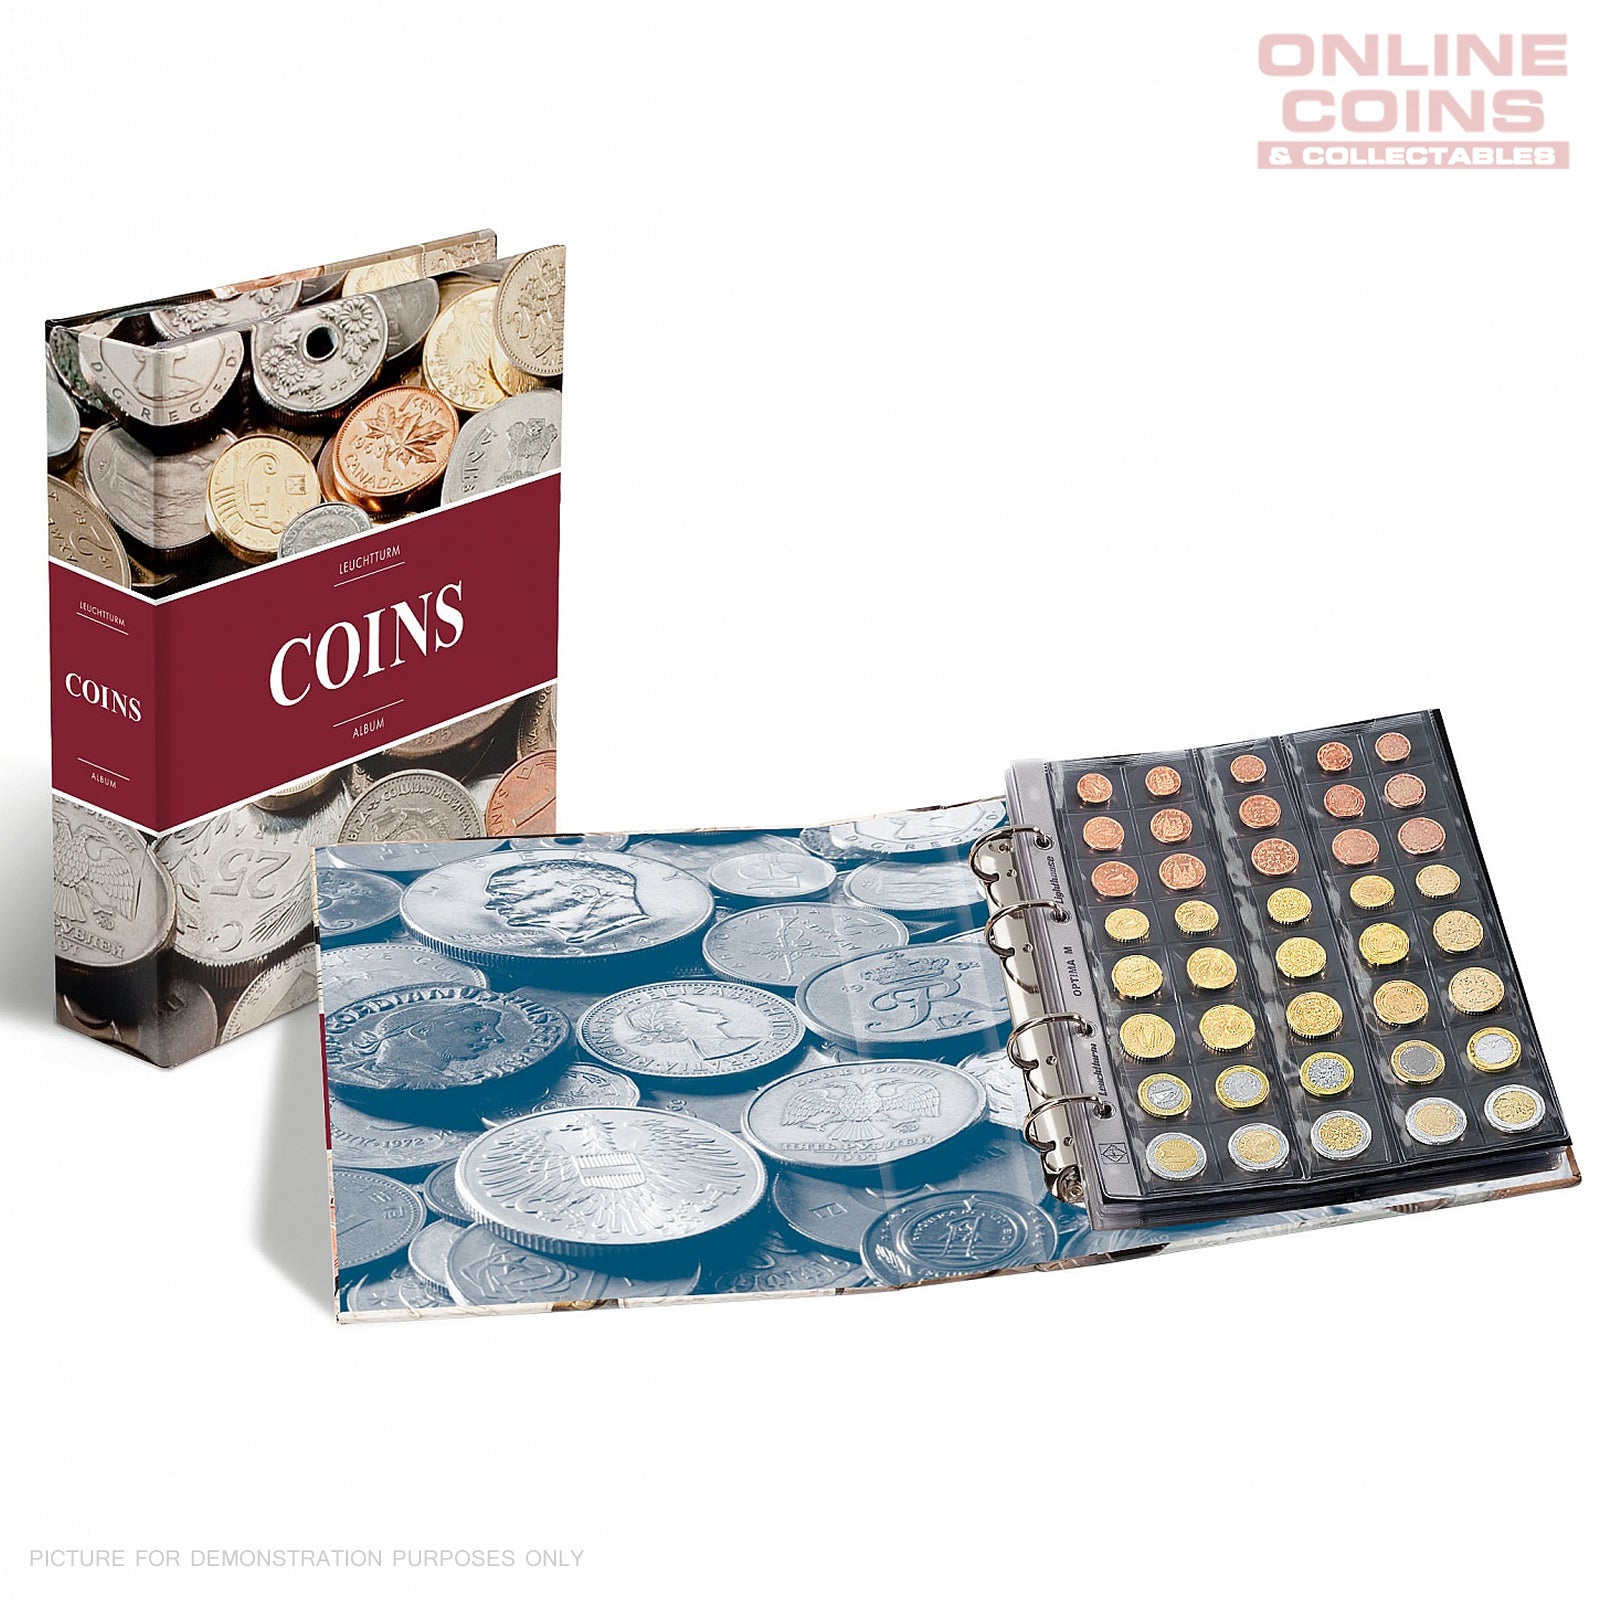 LIGHTHOUSE COIN ALBUM OPTIMA "COINS" INCLUDING 5 COIN PAGES